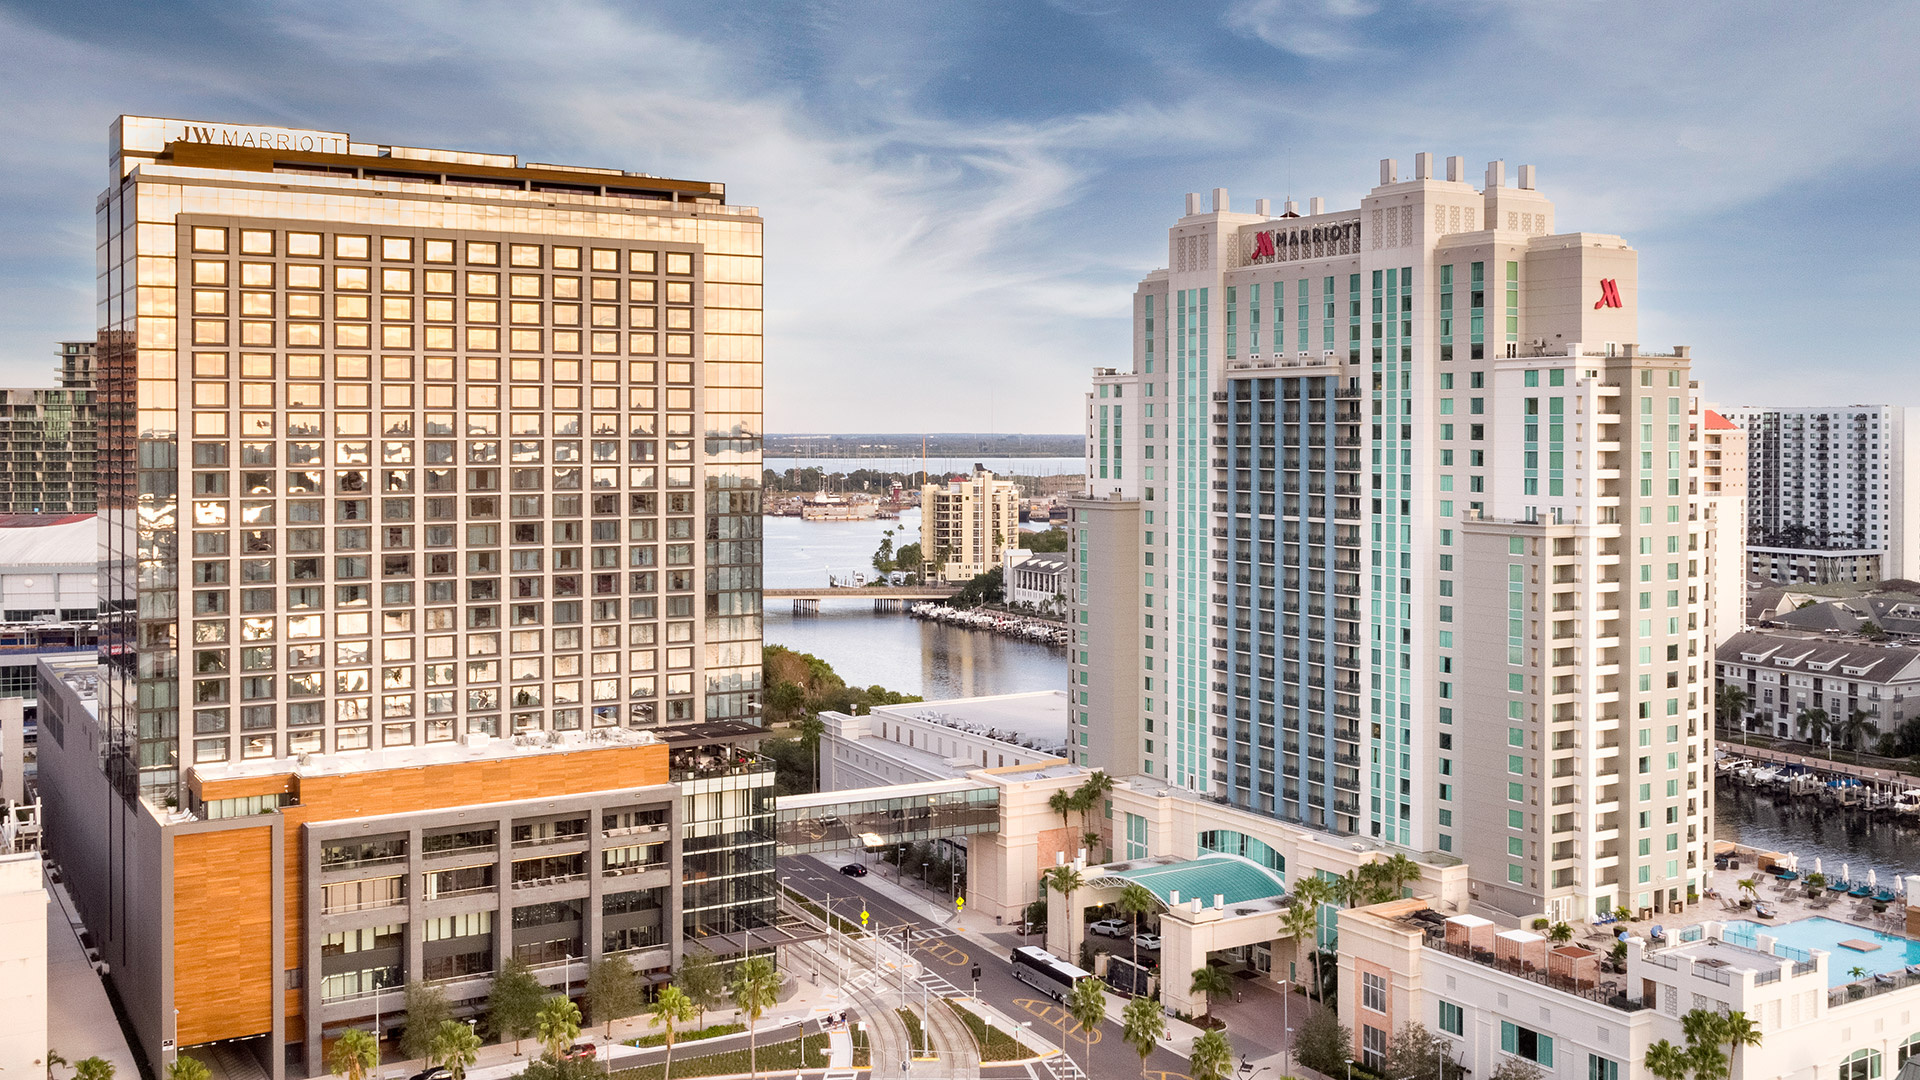 Downtown Tampa hotels, Marriott Water Street, Tampa collection, Urban accommodations, 1920x1080 Full HD Desktop